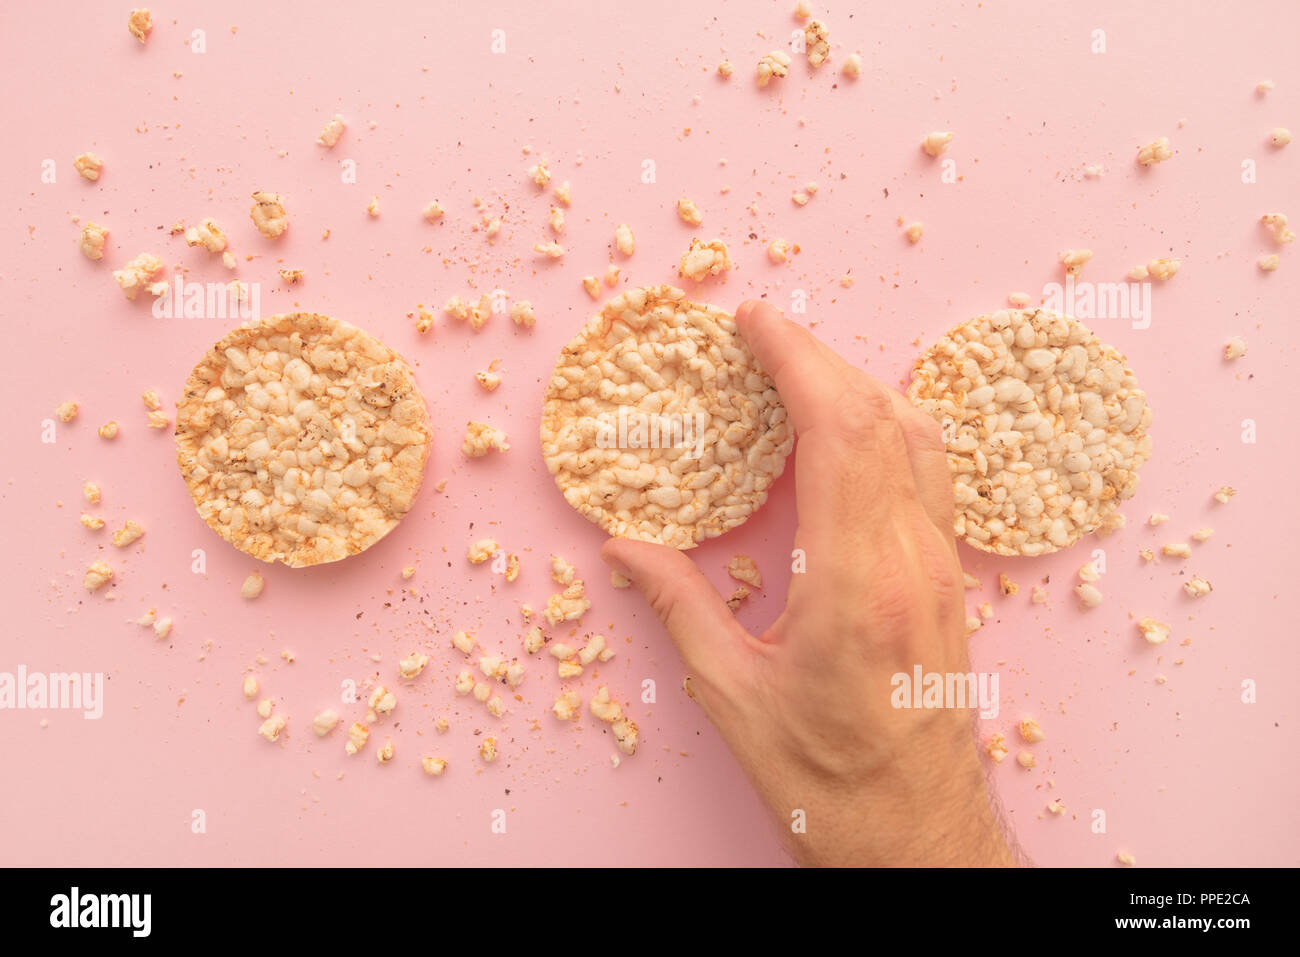 Rice cakes in male hand over pastel pink background, overhead view Stock Photo